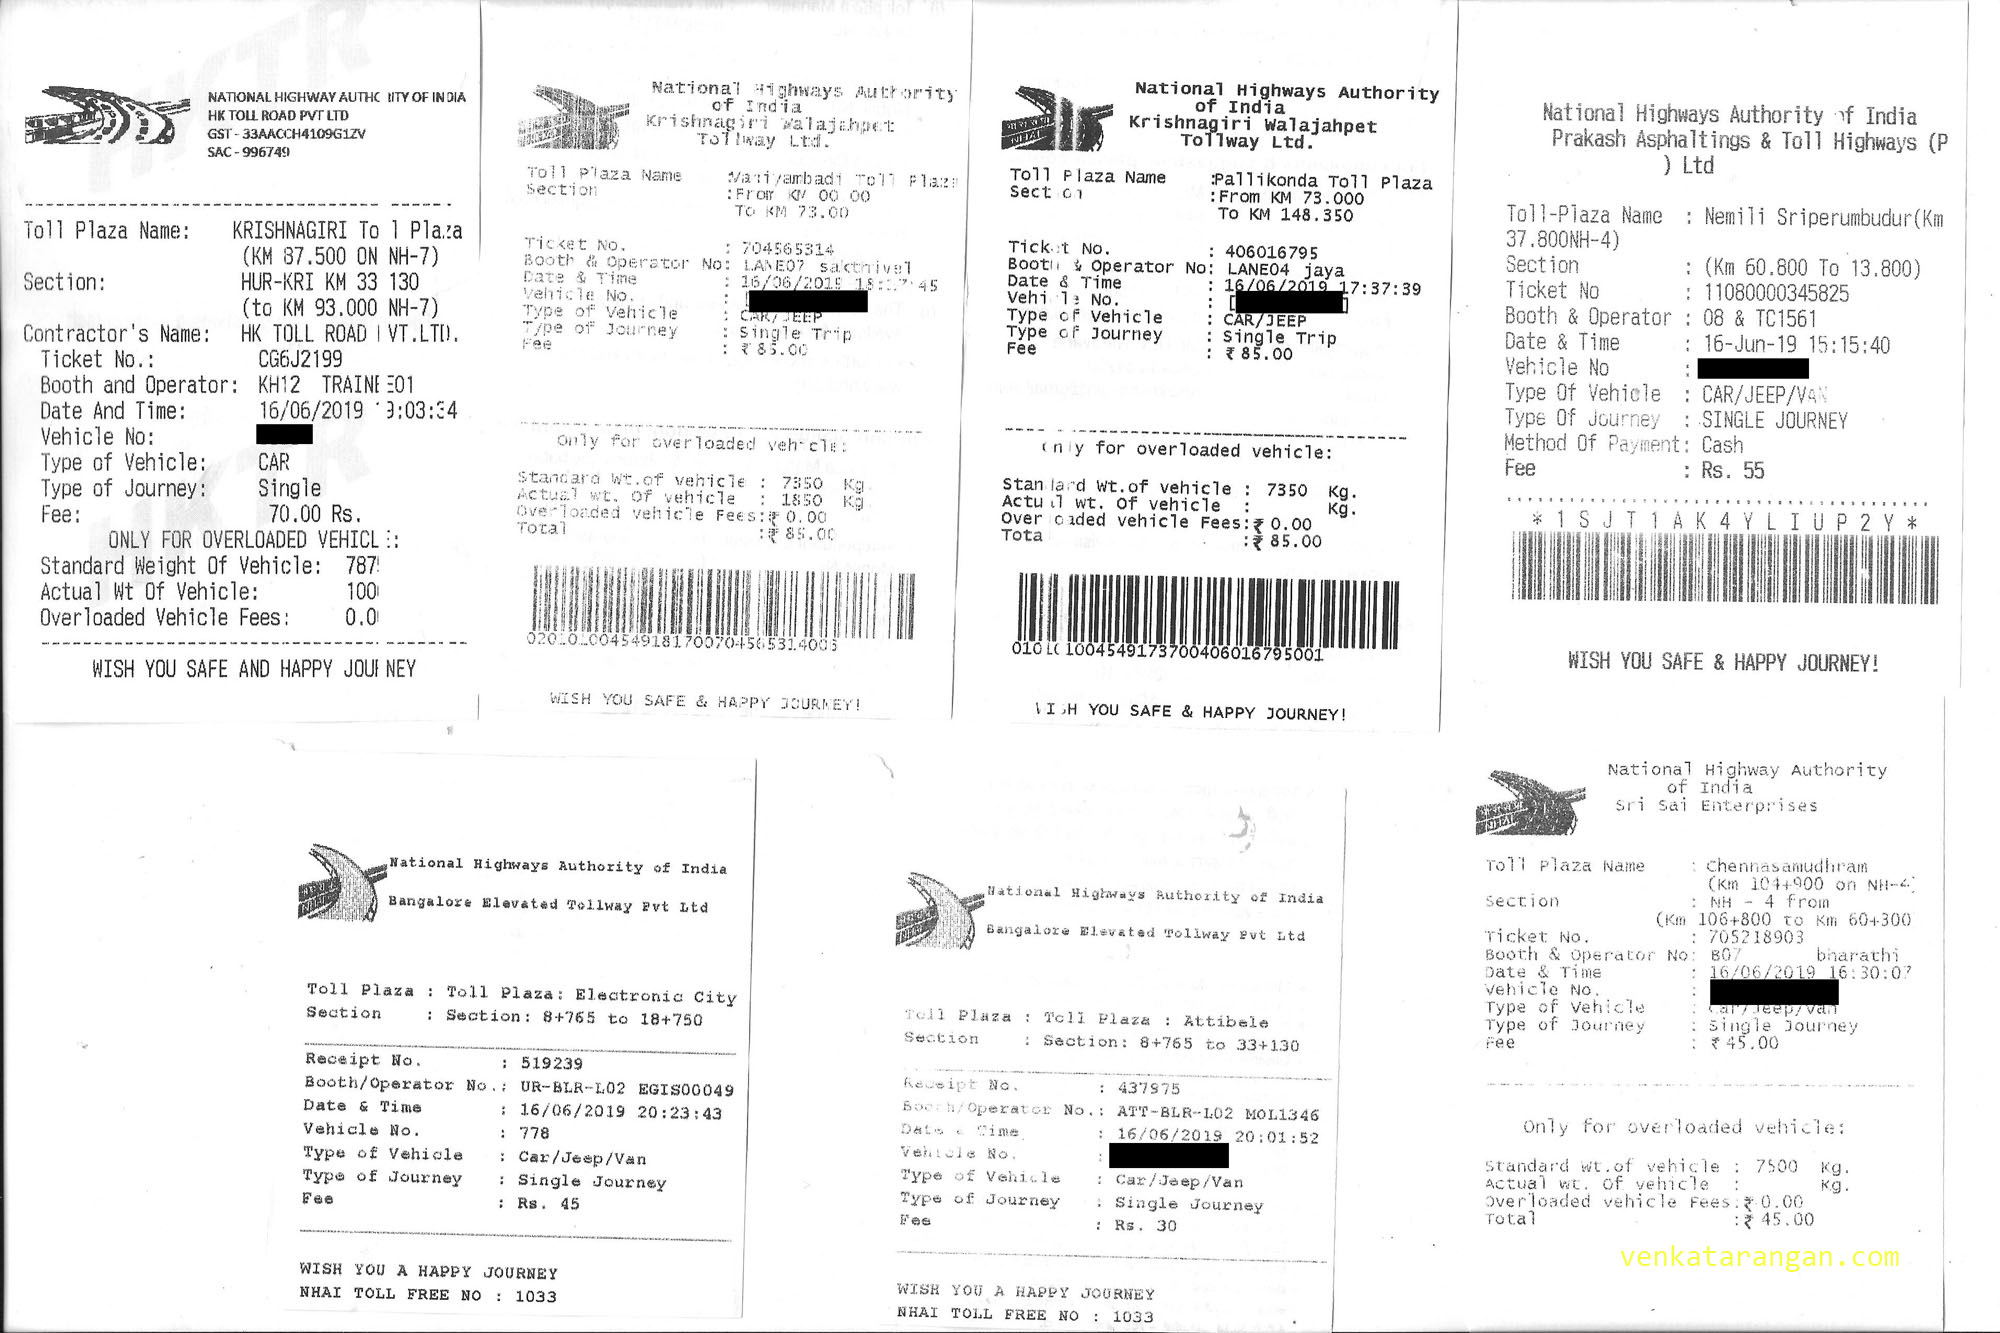 Highway toll tickets - Chennai to Bangalore - Rs.415 in total